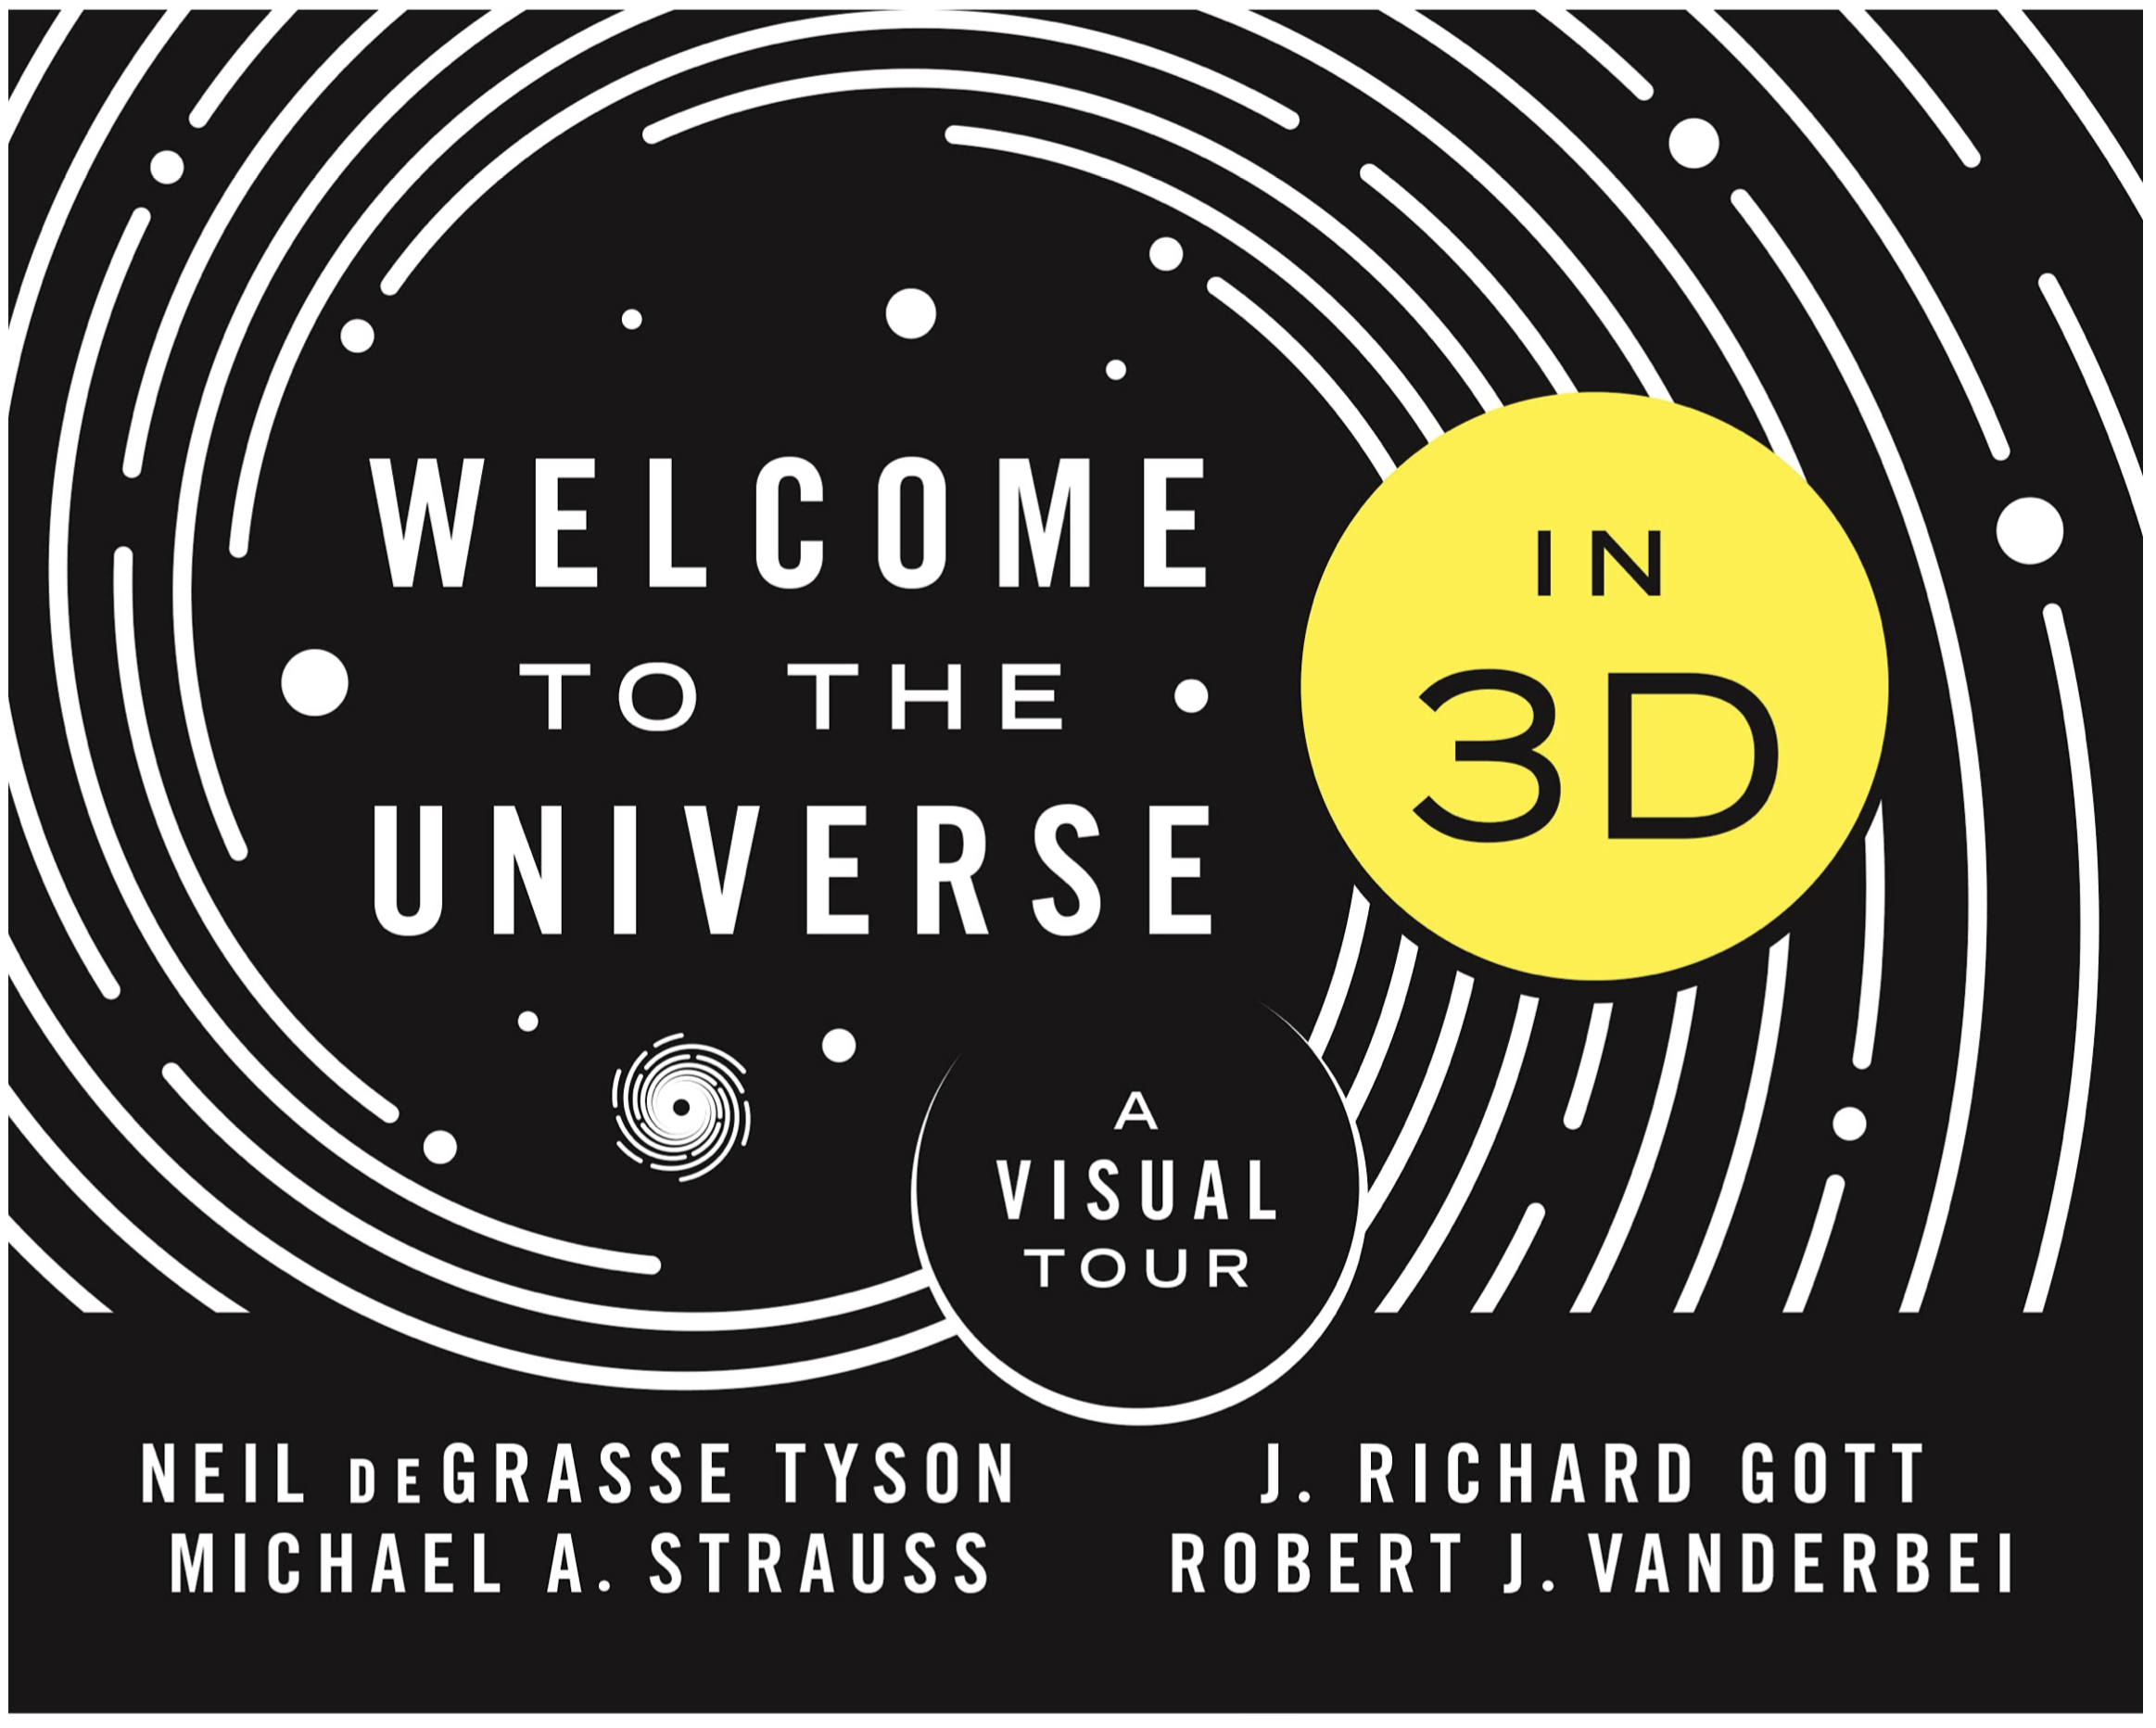 Link to Welcome to the Universe in 3D.